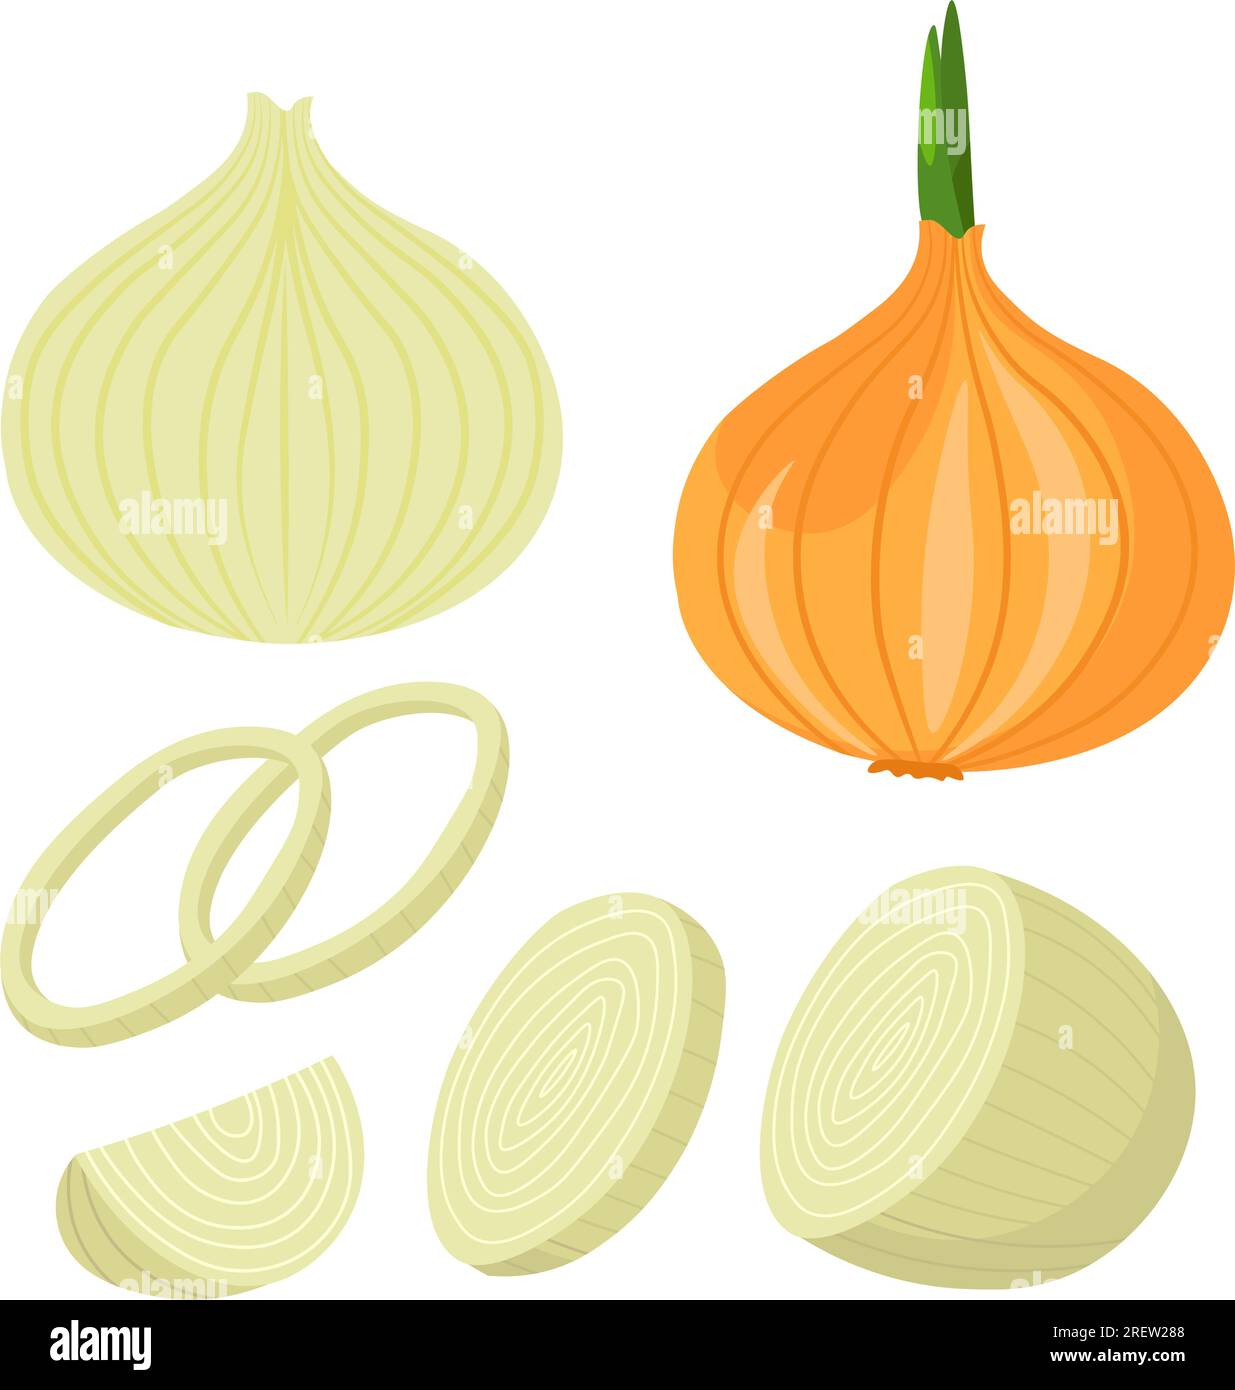 Onion ripe vegetable sliced, cooking dishes vector Stock Vector